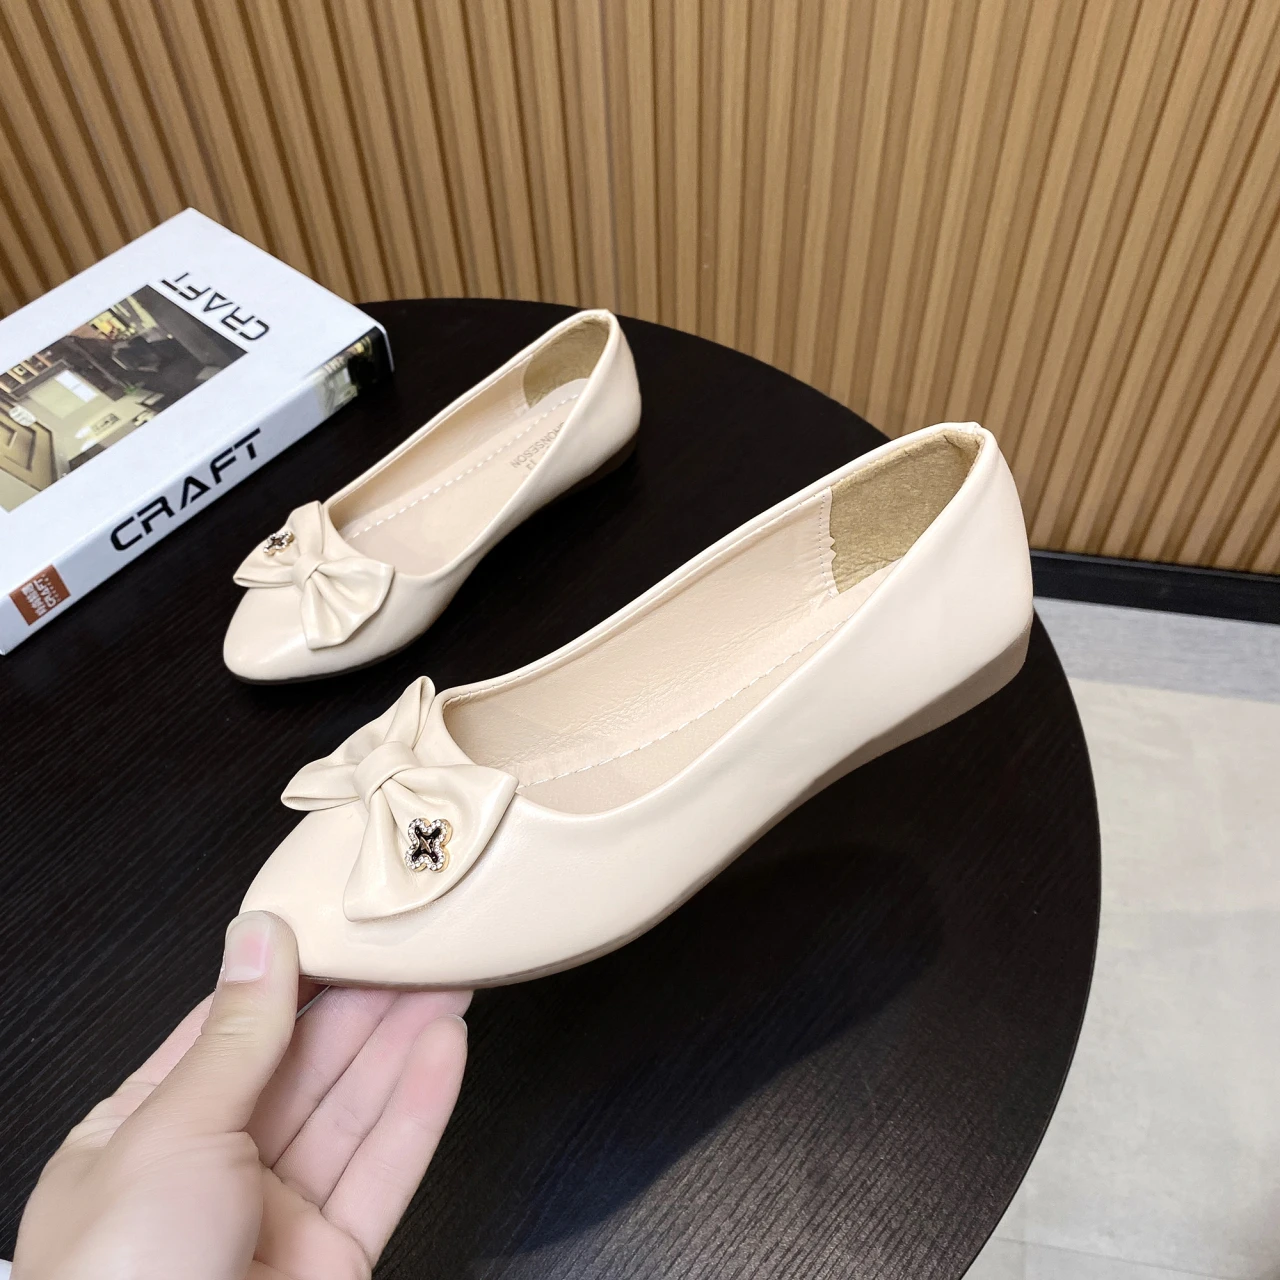 

Women's Flats Pointed Toe Boat Shoes Bowtie Ballet Flats White Shallow Ladies Shoes Comfortable Leather Shoes for Female 1084N